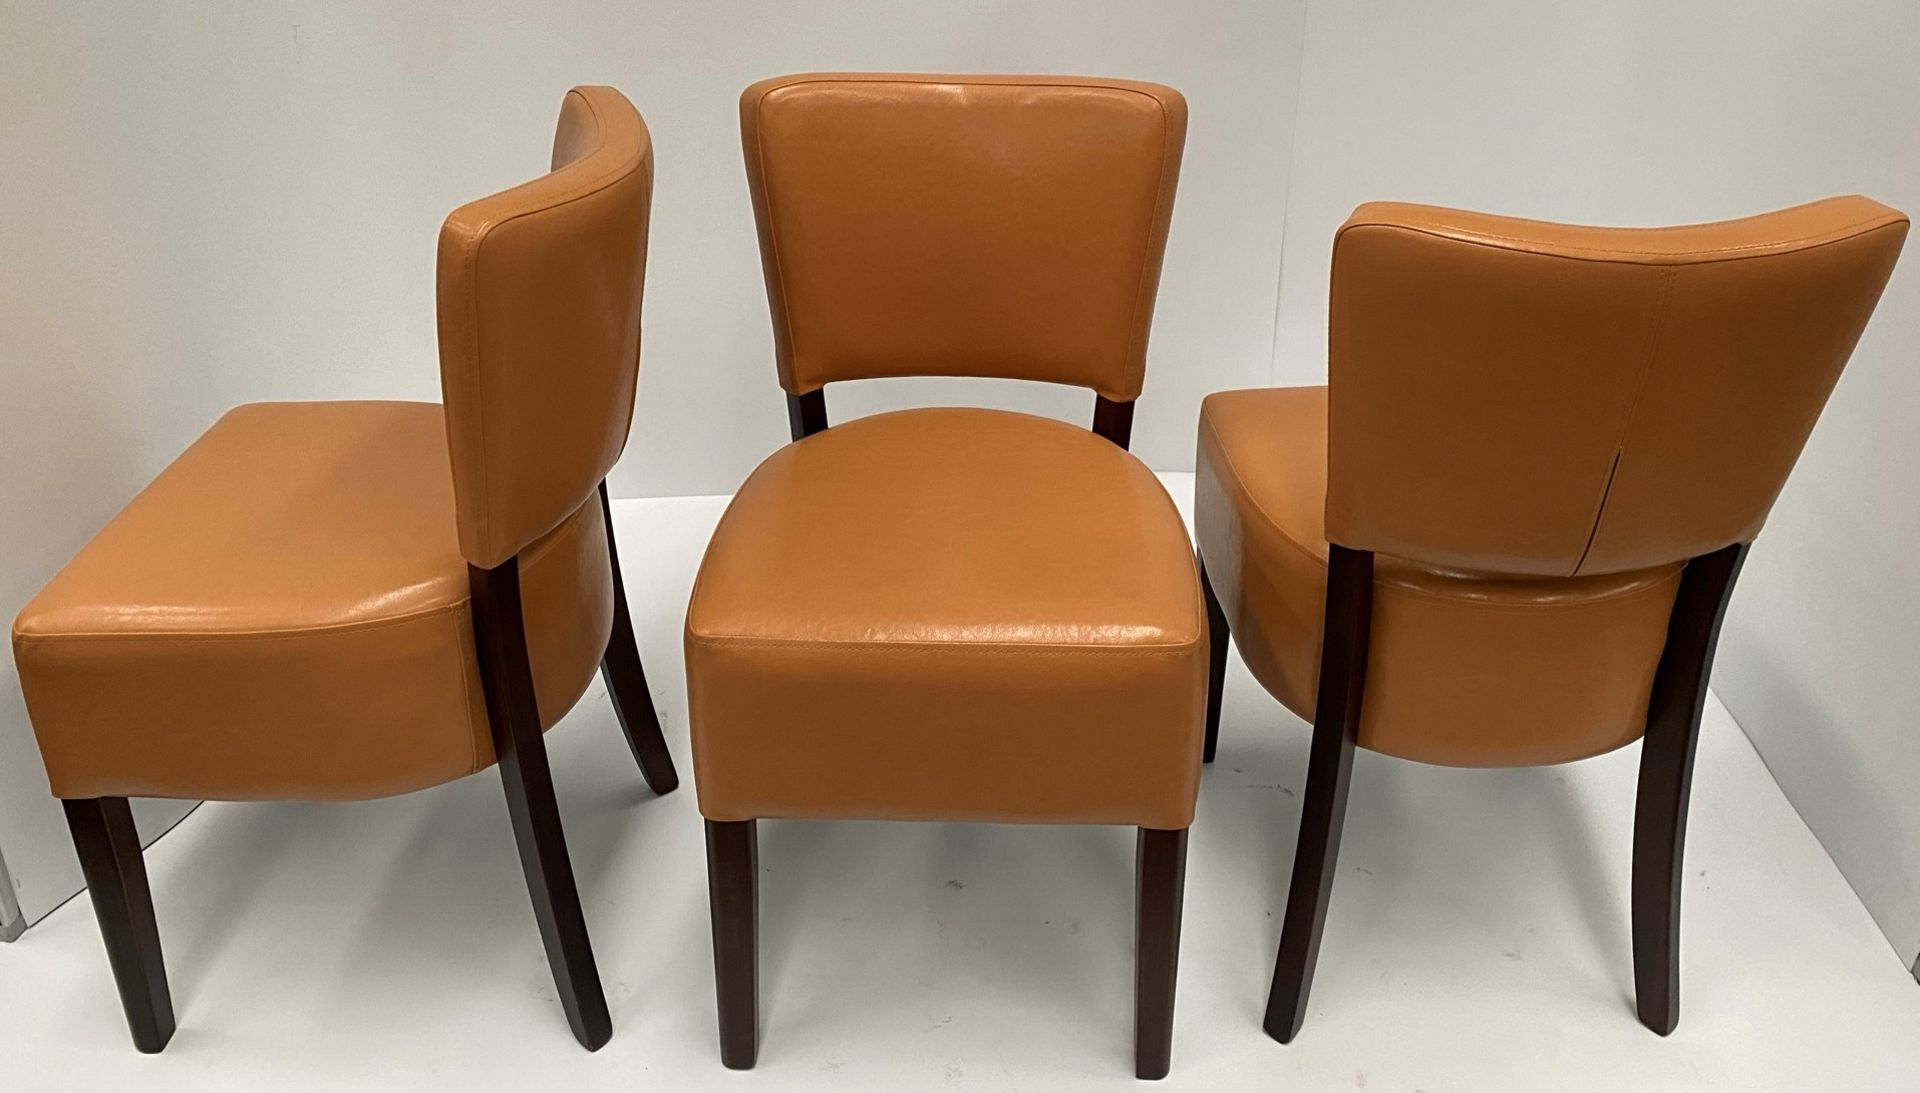 3 x Memphis Margo BR-4 Brown side/dining chairs with walnut coloured frames - Image 2 of 3